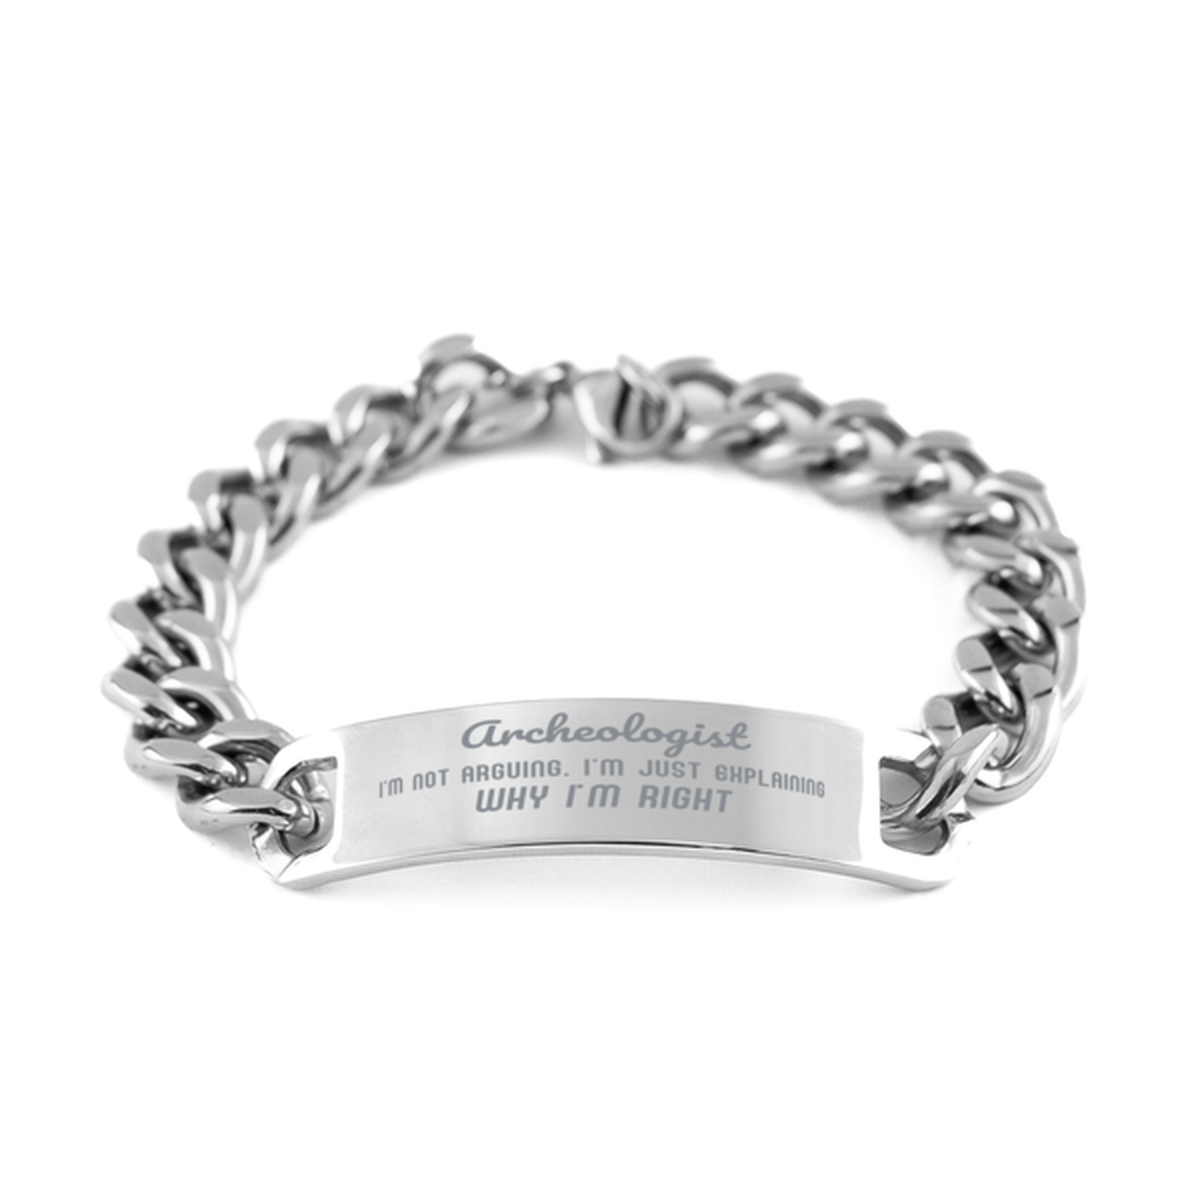 Archeologist I'm not Arguing. I'm Just Explaining Why I'm RIGHT Cuban Chain Stainless Steel Bracelet, Graduation Birthday Christmas Archeologist Gifts For Archeologist Funny Saying Quote Present for Men Women Coworker